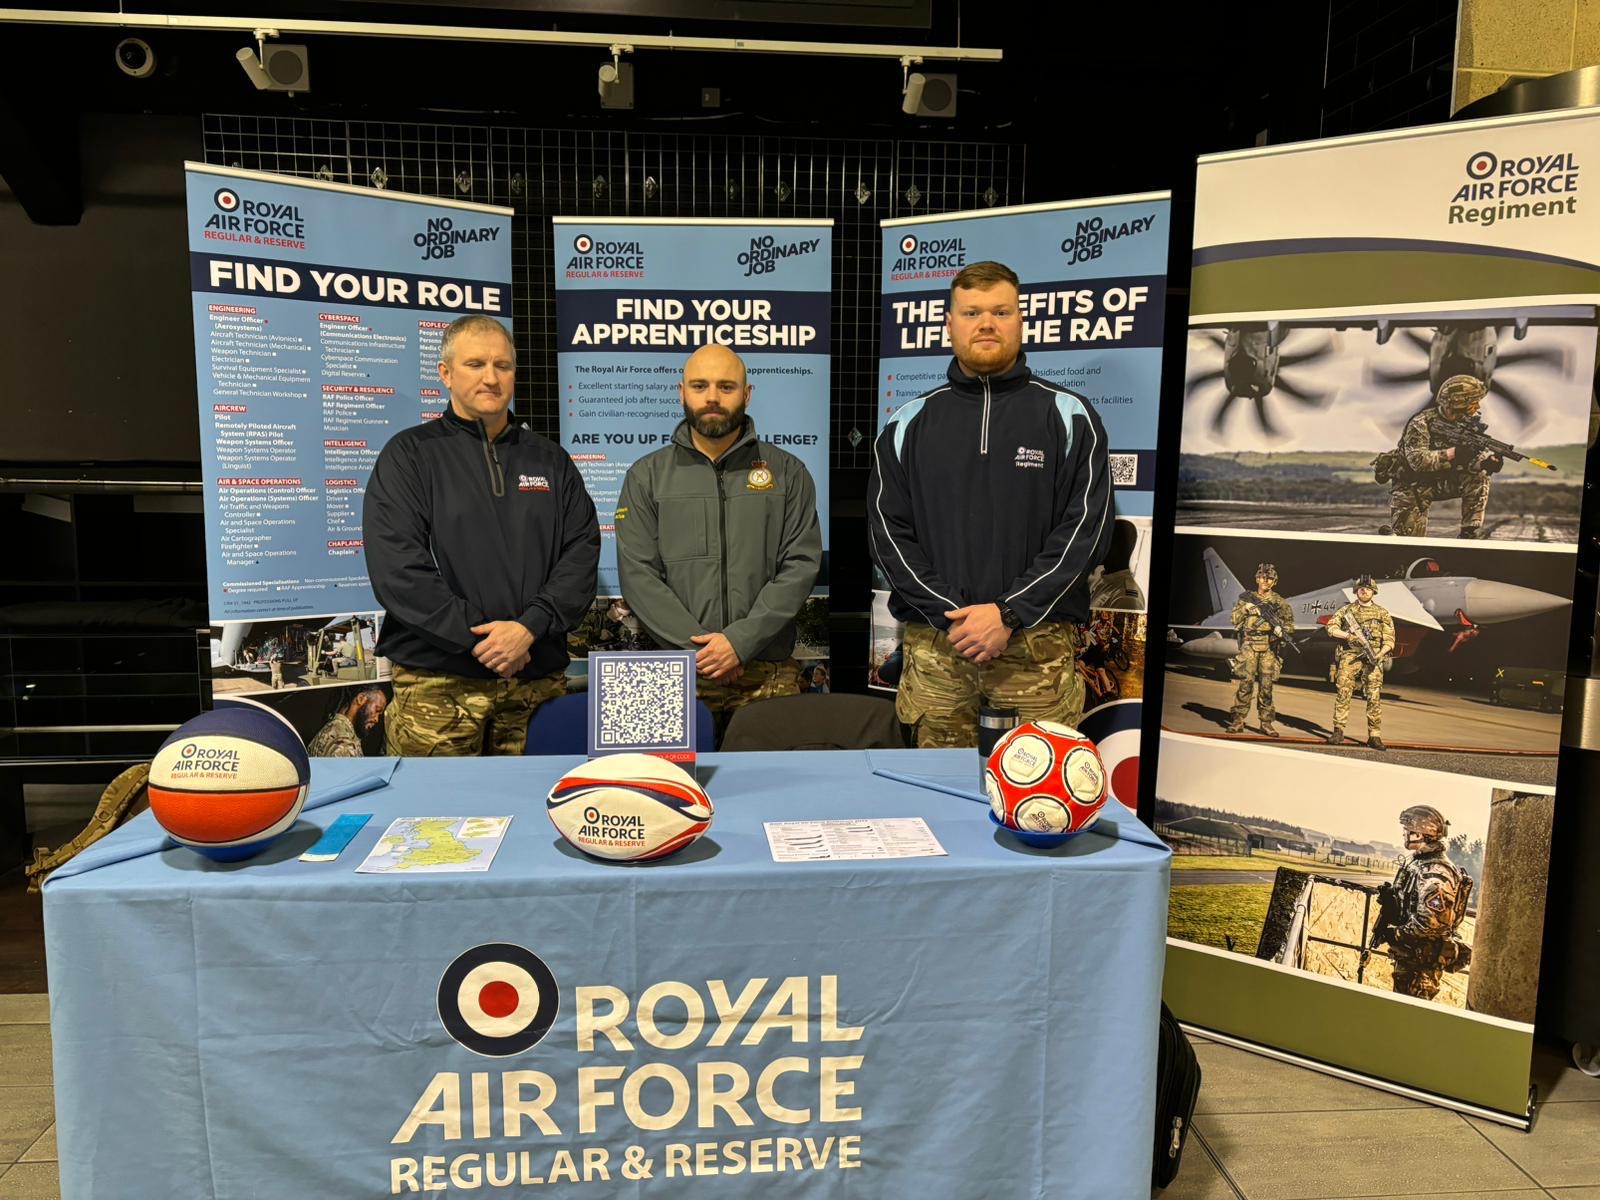 Royal Air Force at our event in Nottingham